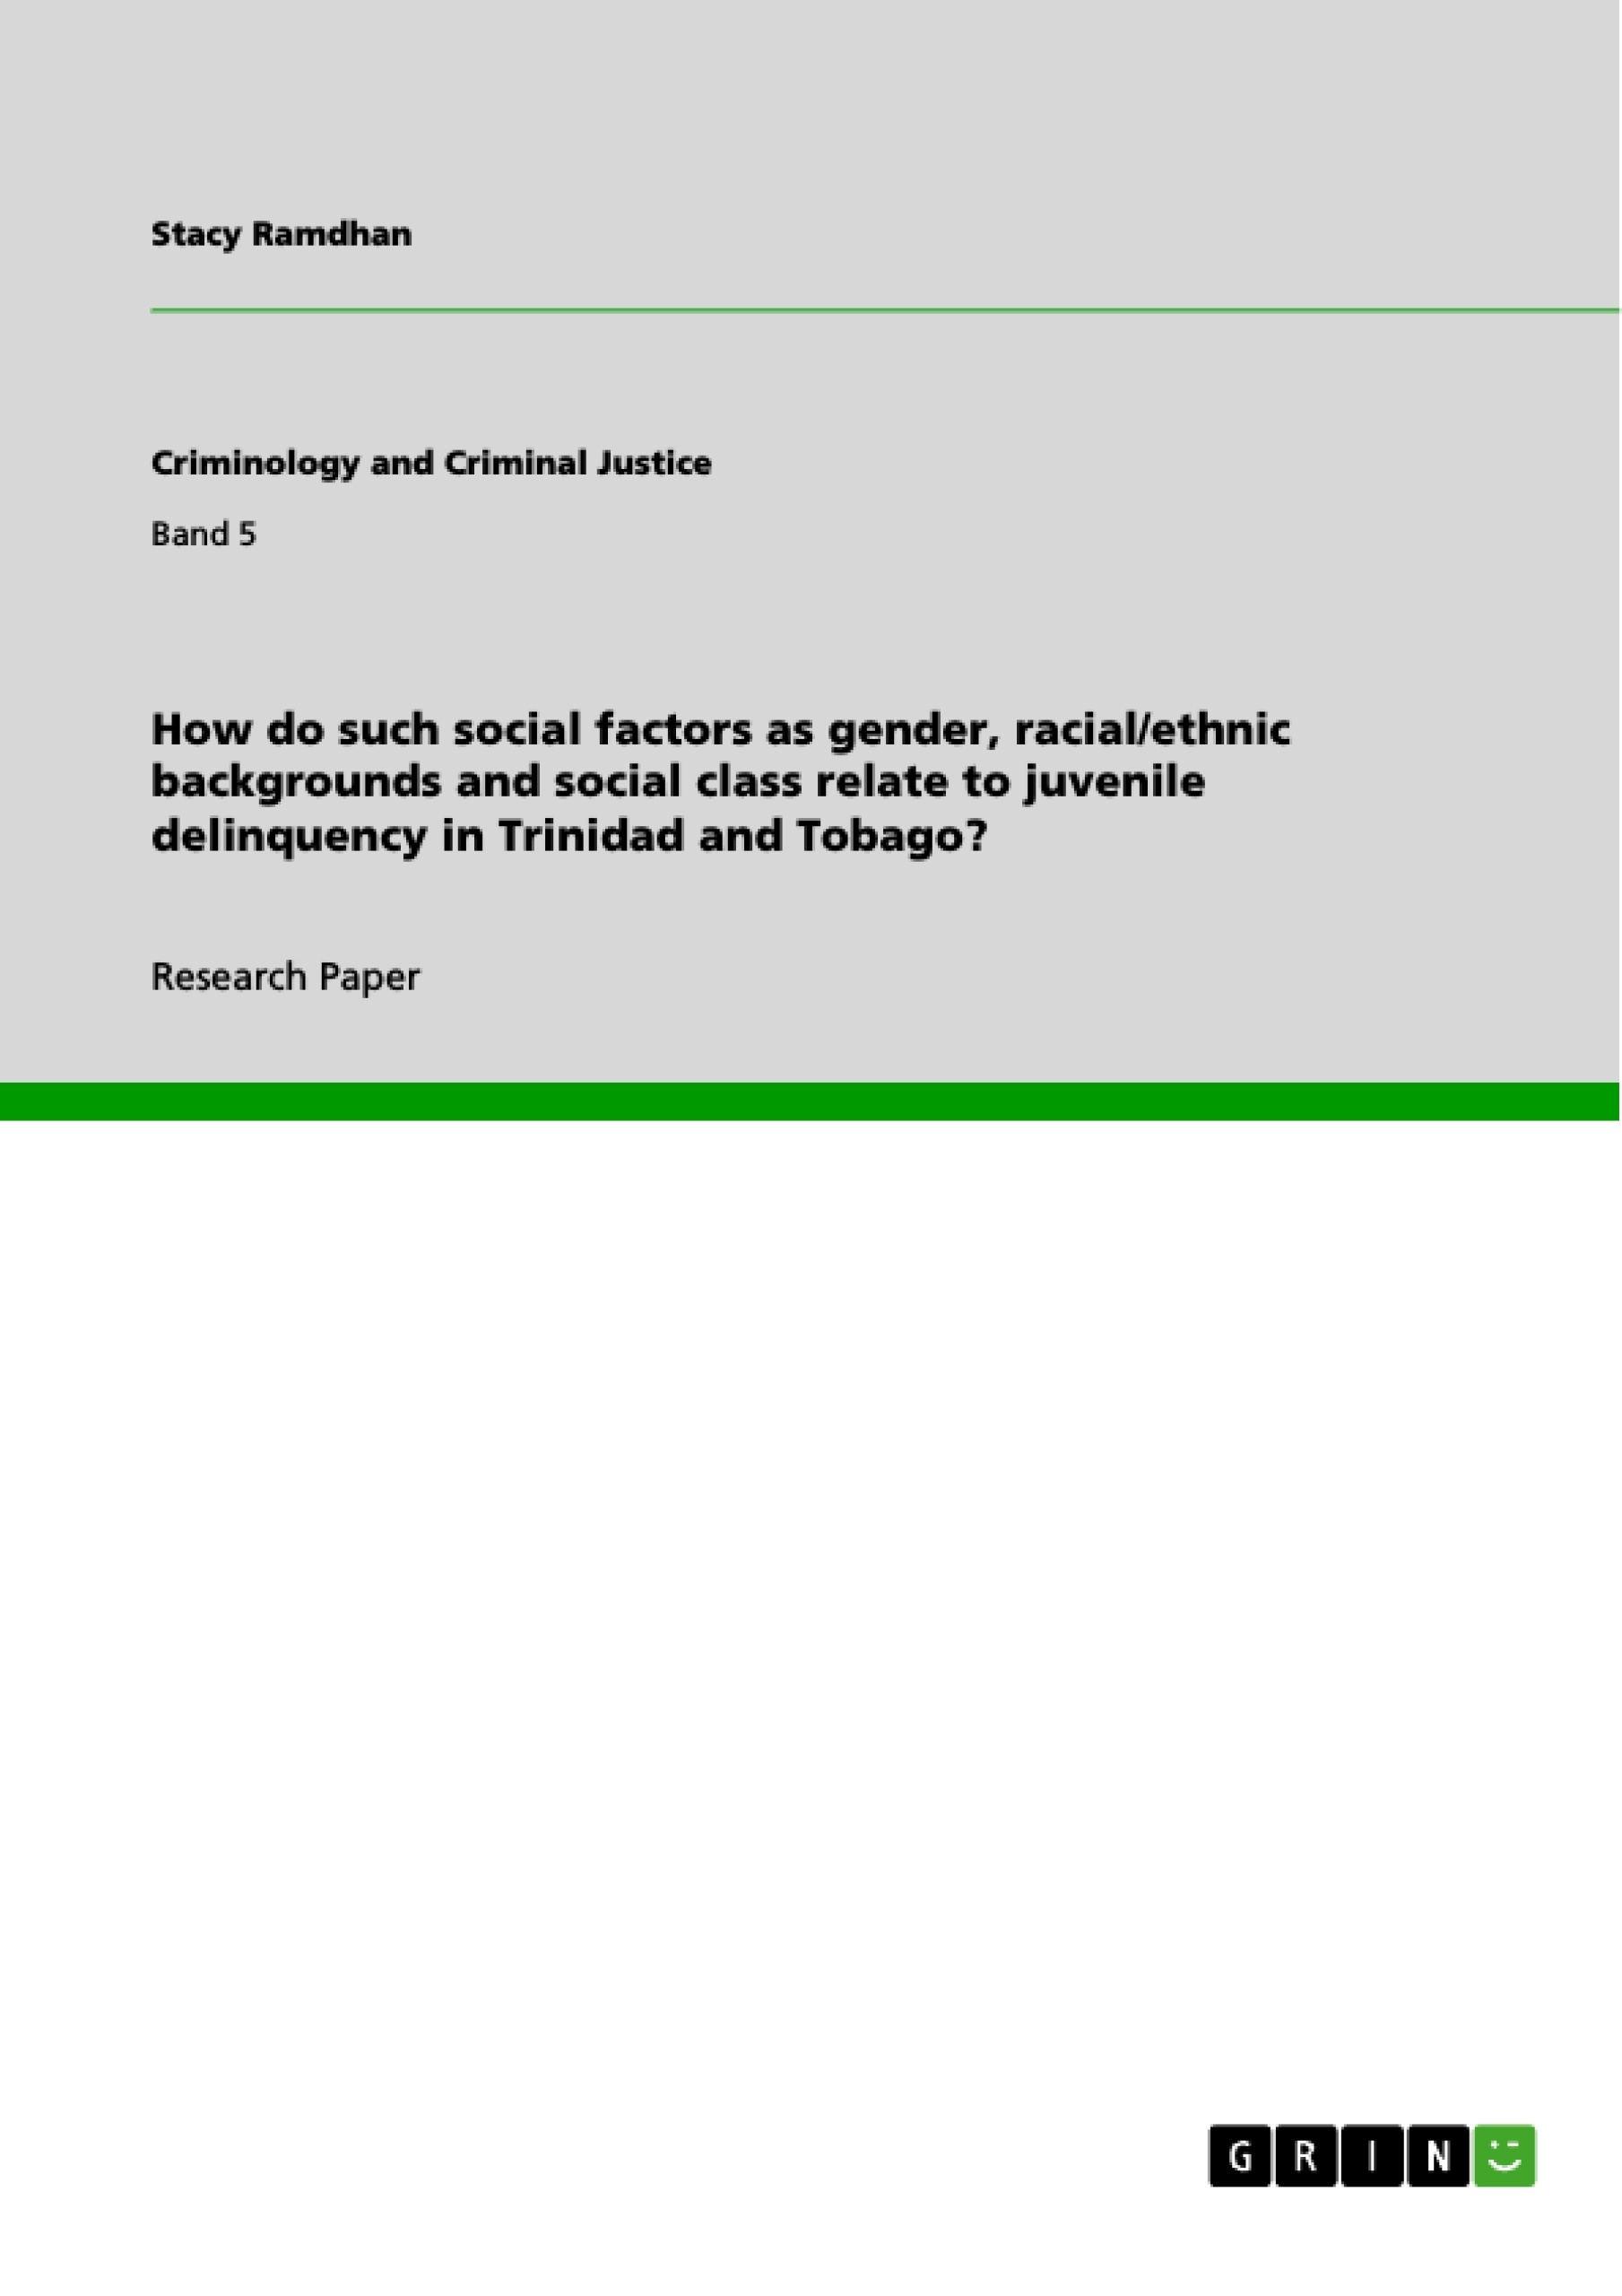 Título: How do such social factors as gender, racial/ethnic backgrounds and social class relate to juvenile delinquency in Trinidad and Tobago?